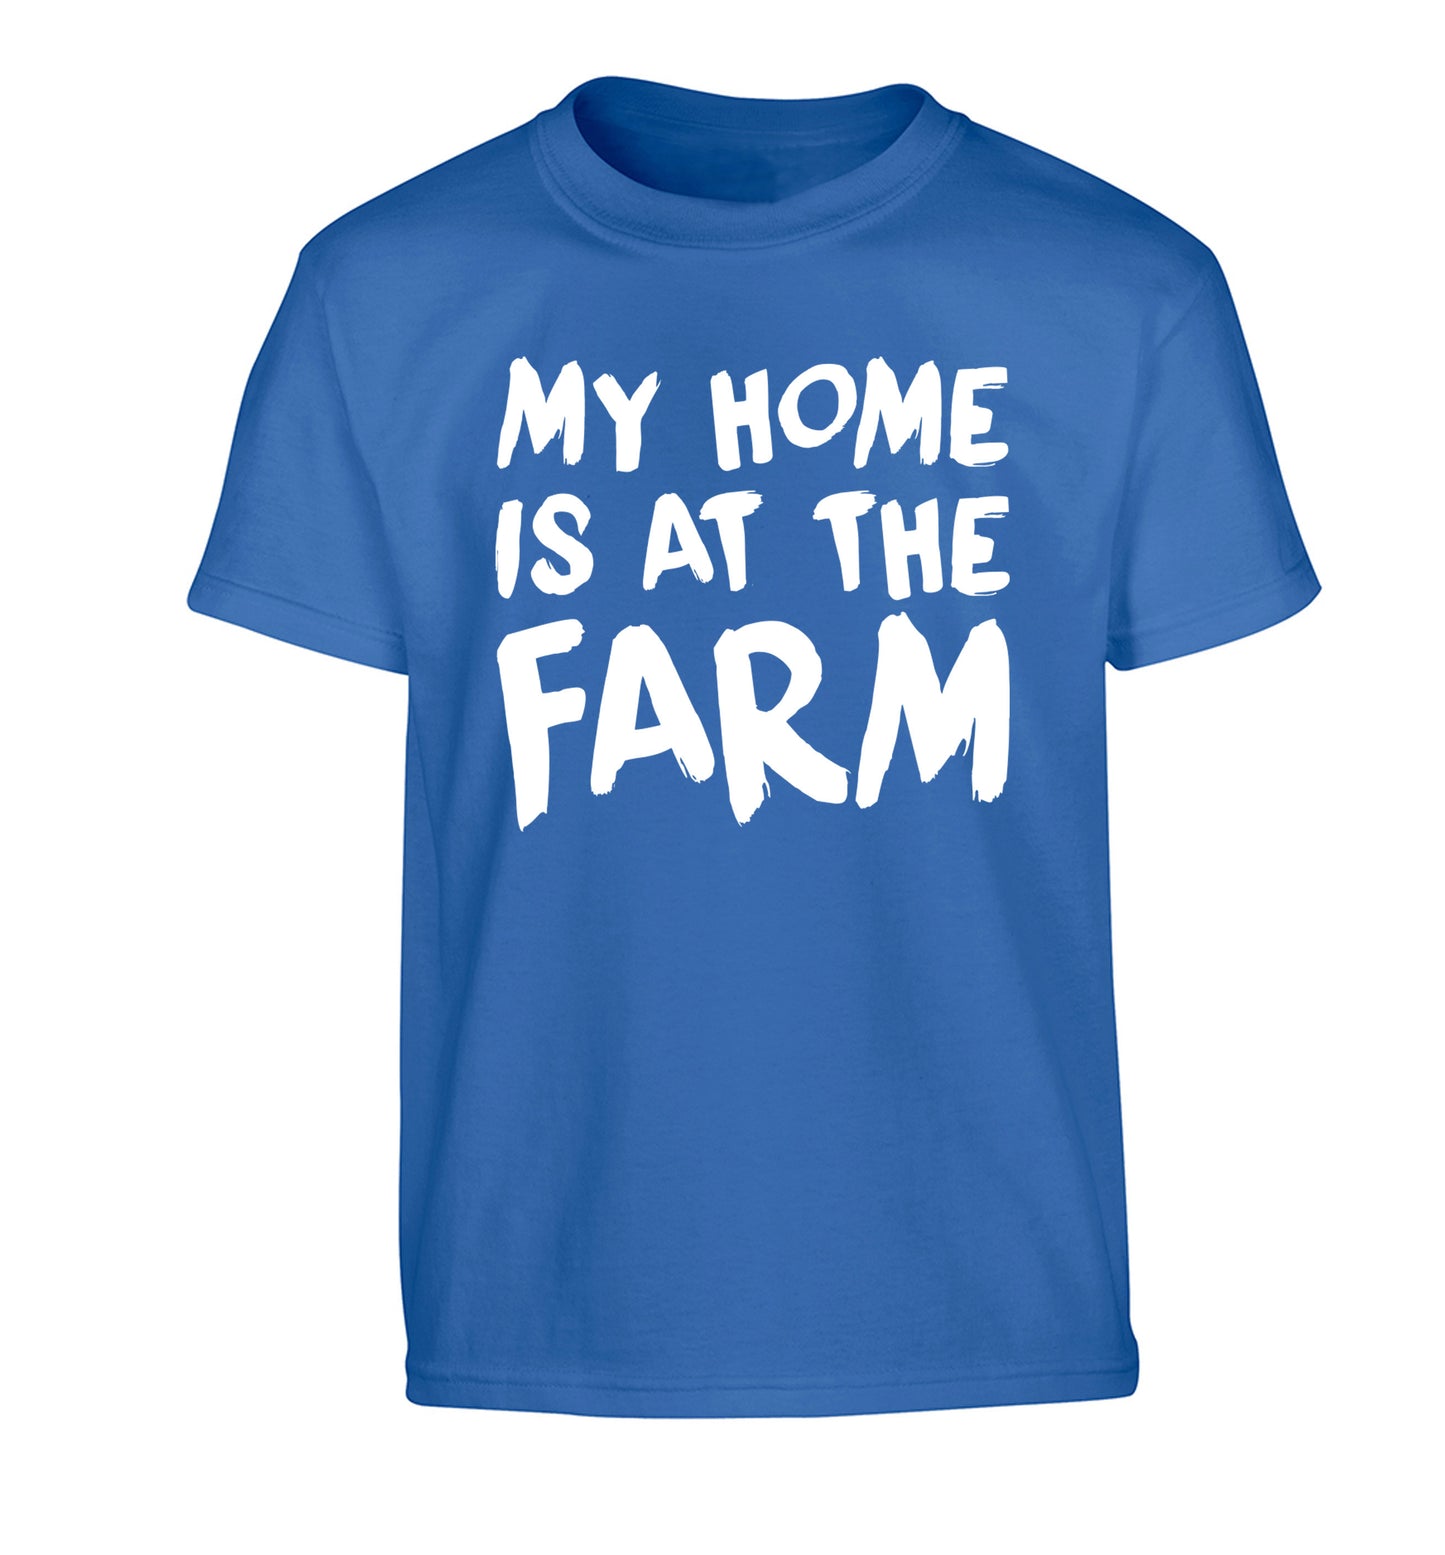 My home is at the farm Children's blue Tshirt 12-14 Years